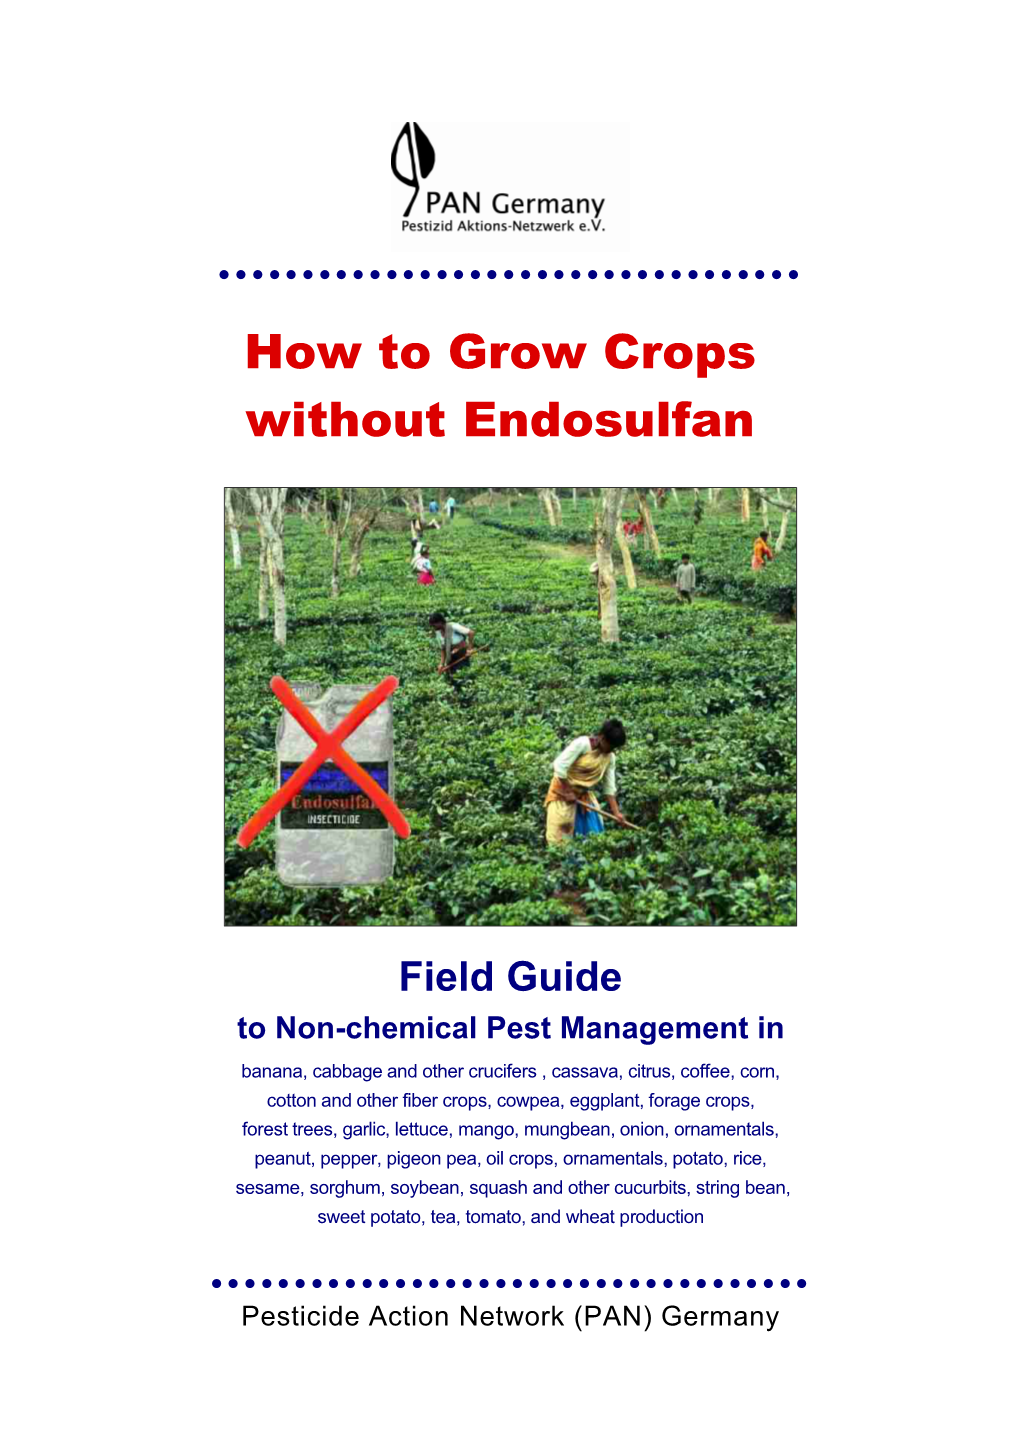 How to Grow Crops Without Endosulfan